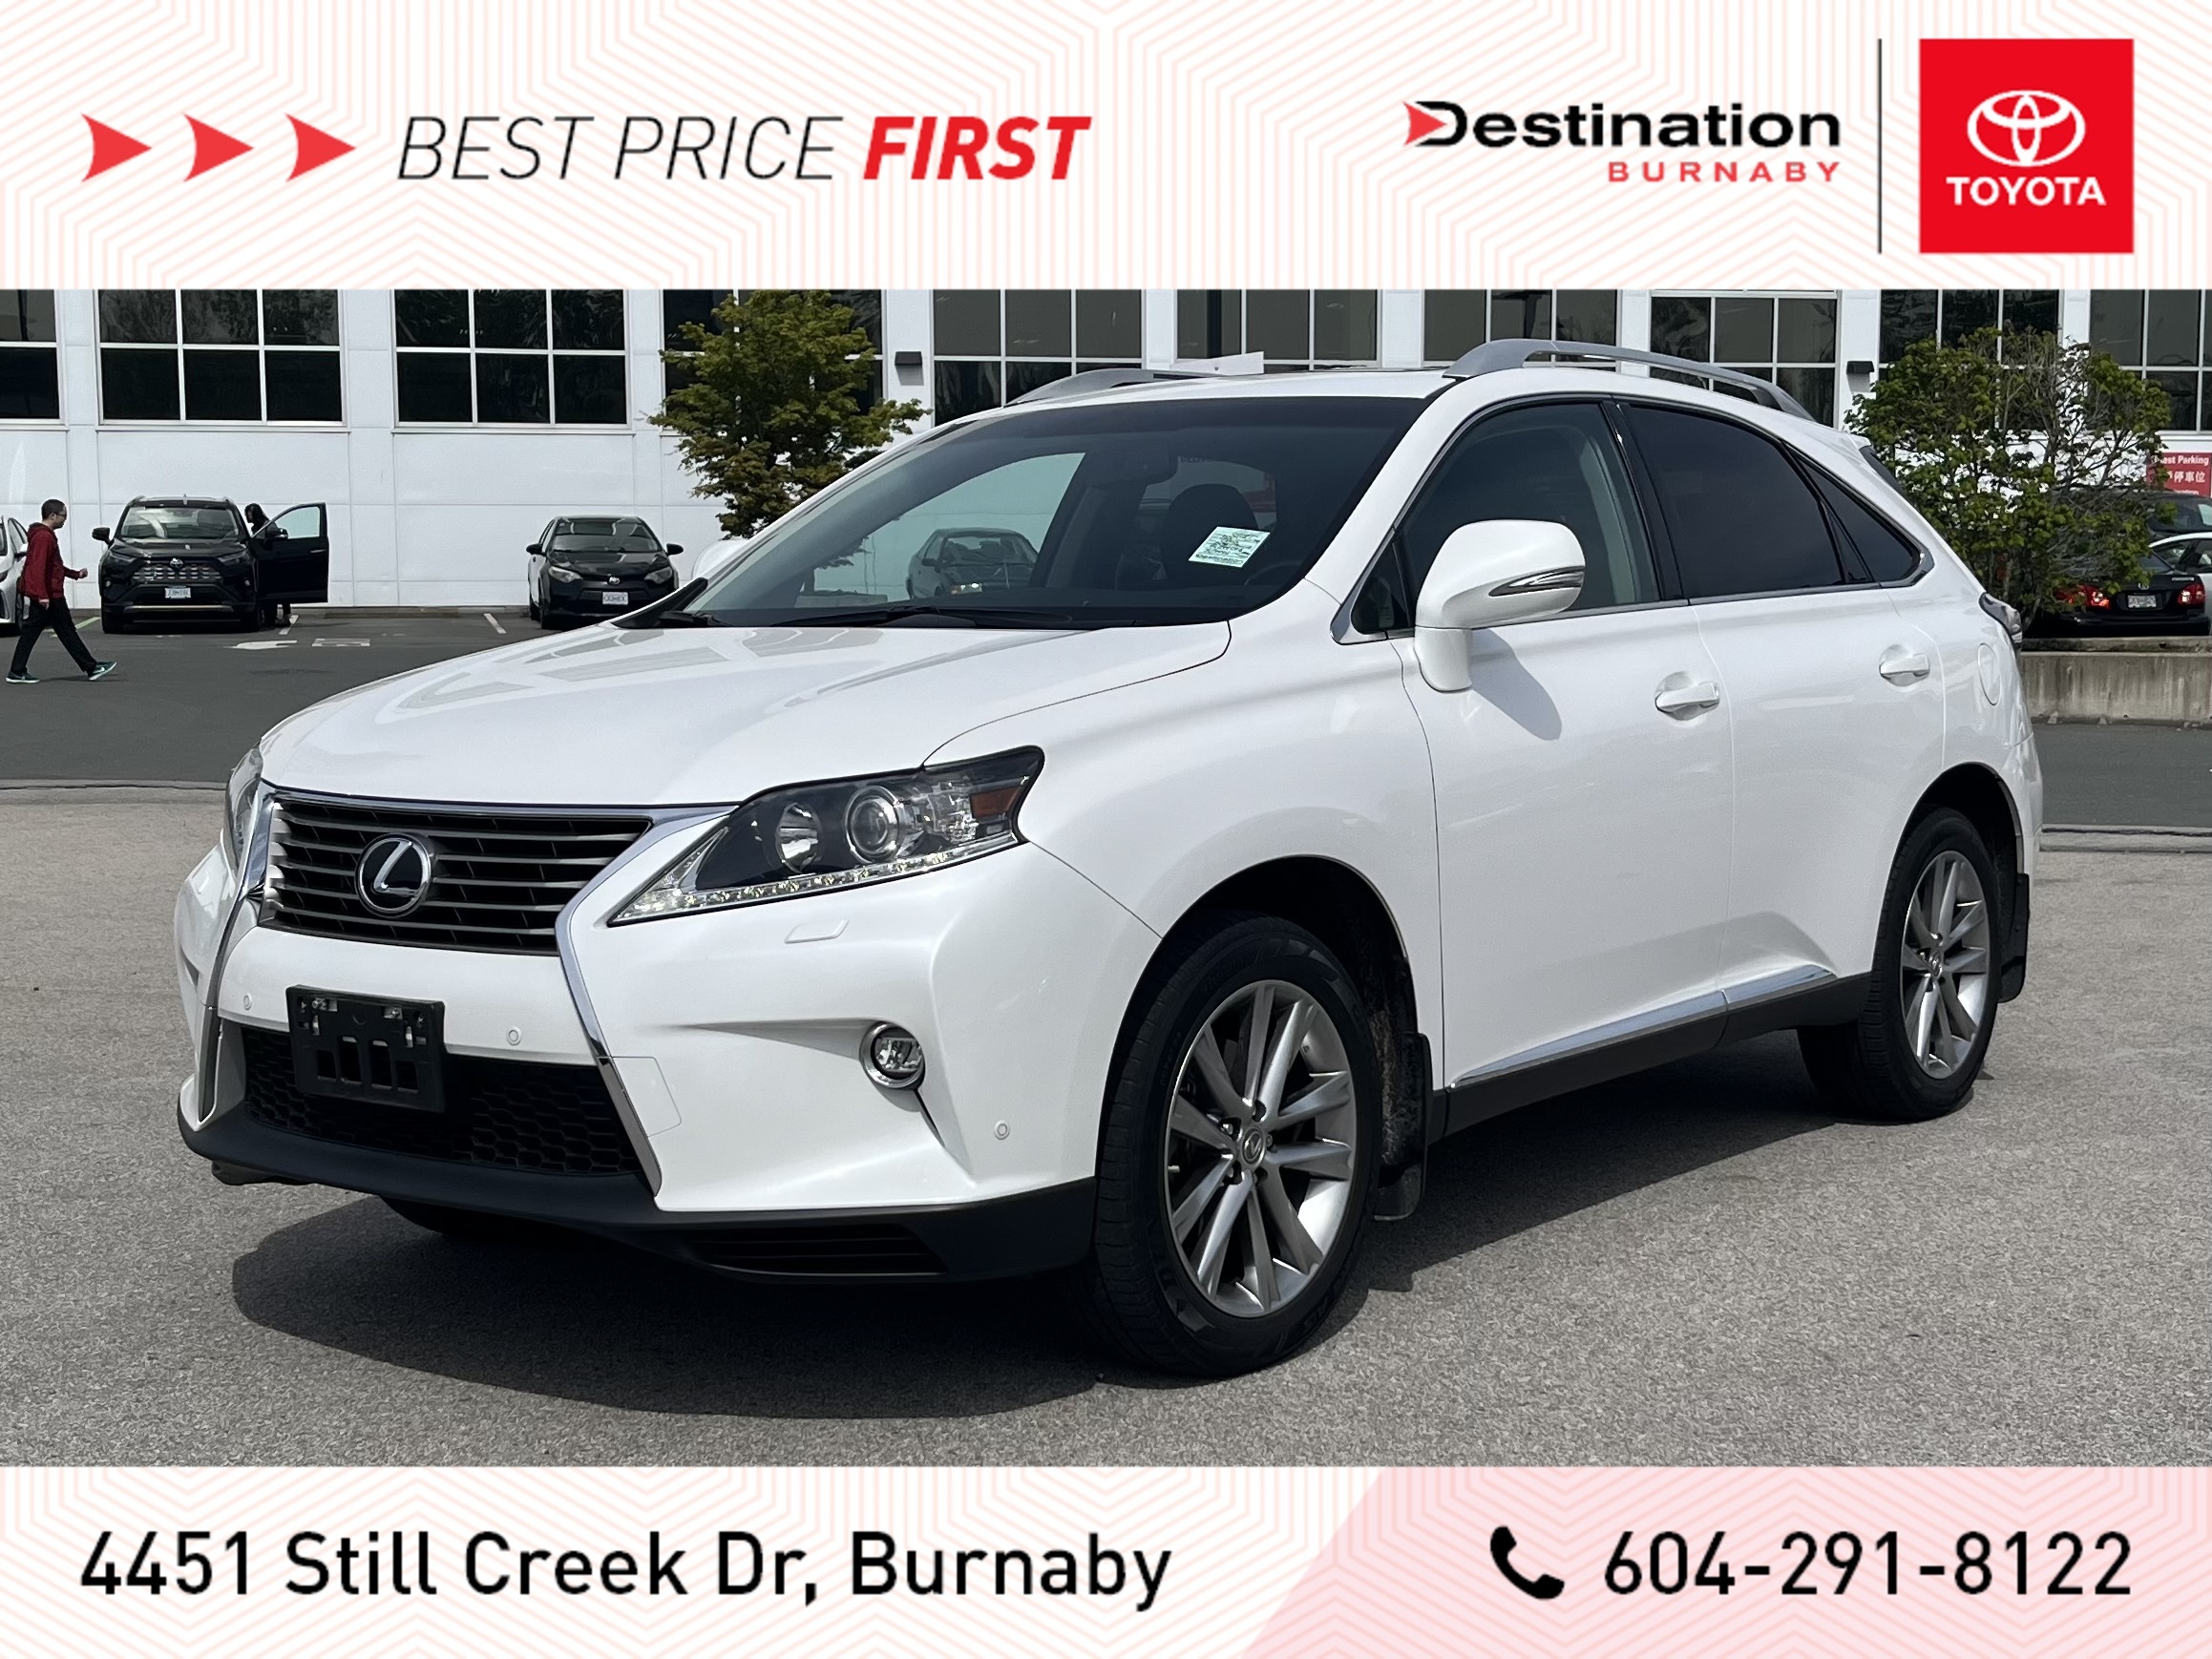 2015 Lexus RX 350 Touring, Low Kms, Loaded